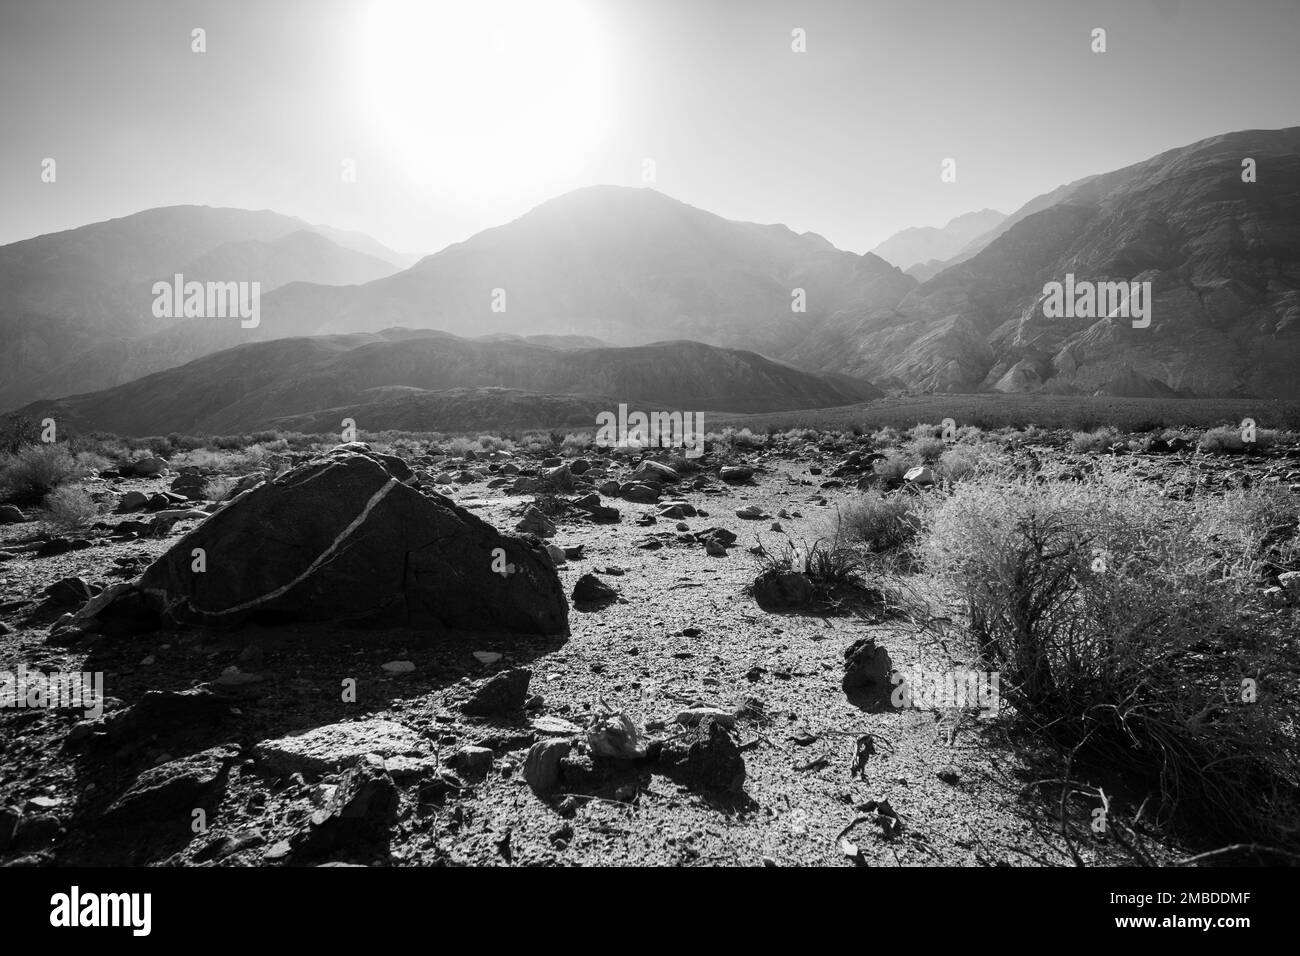 A dramatic black and white image of Saline Valley in Death Valley, California. Stock Photo